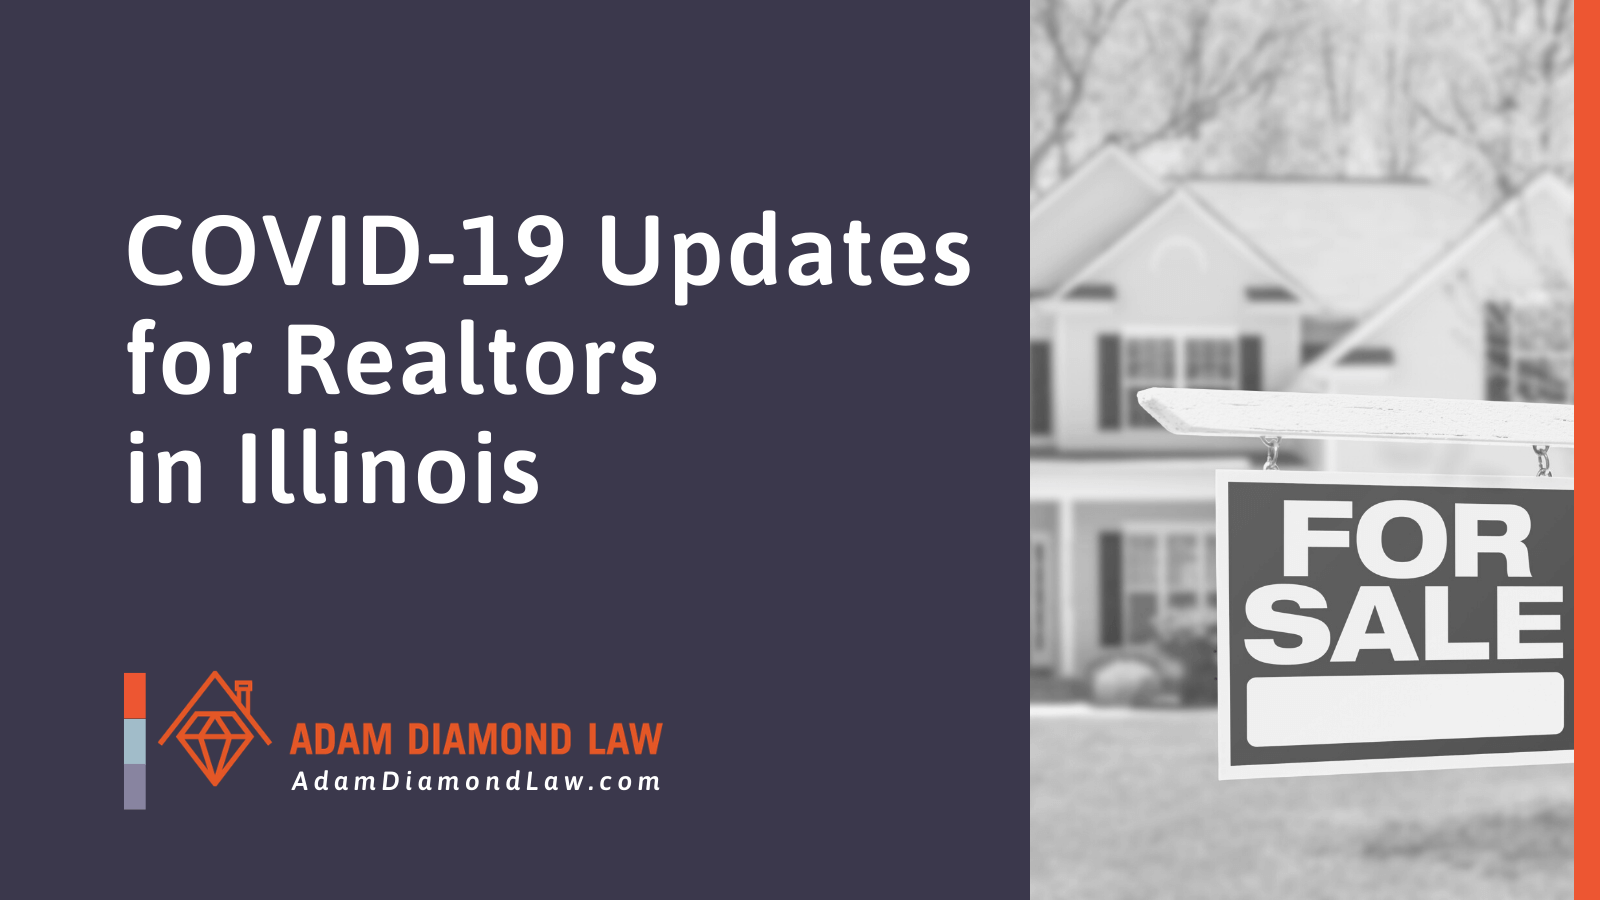 COVID-19 Updates for Realtors in Illinois - Adam Diamond Law | McHenry, IL Residential Real Estate Lawyer